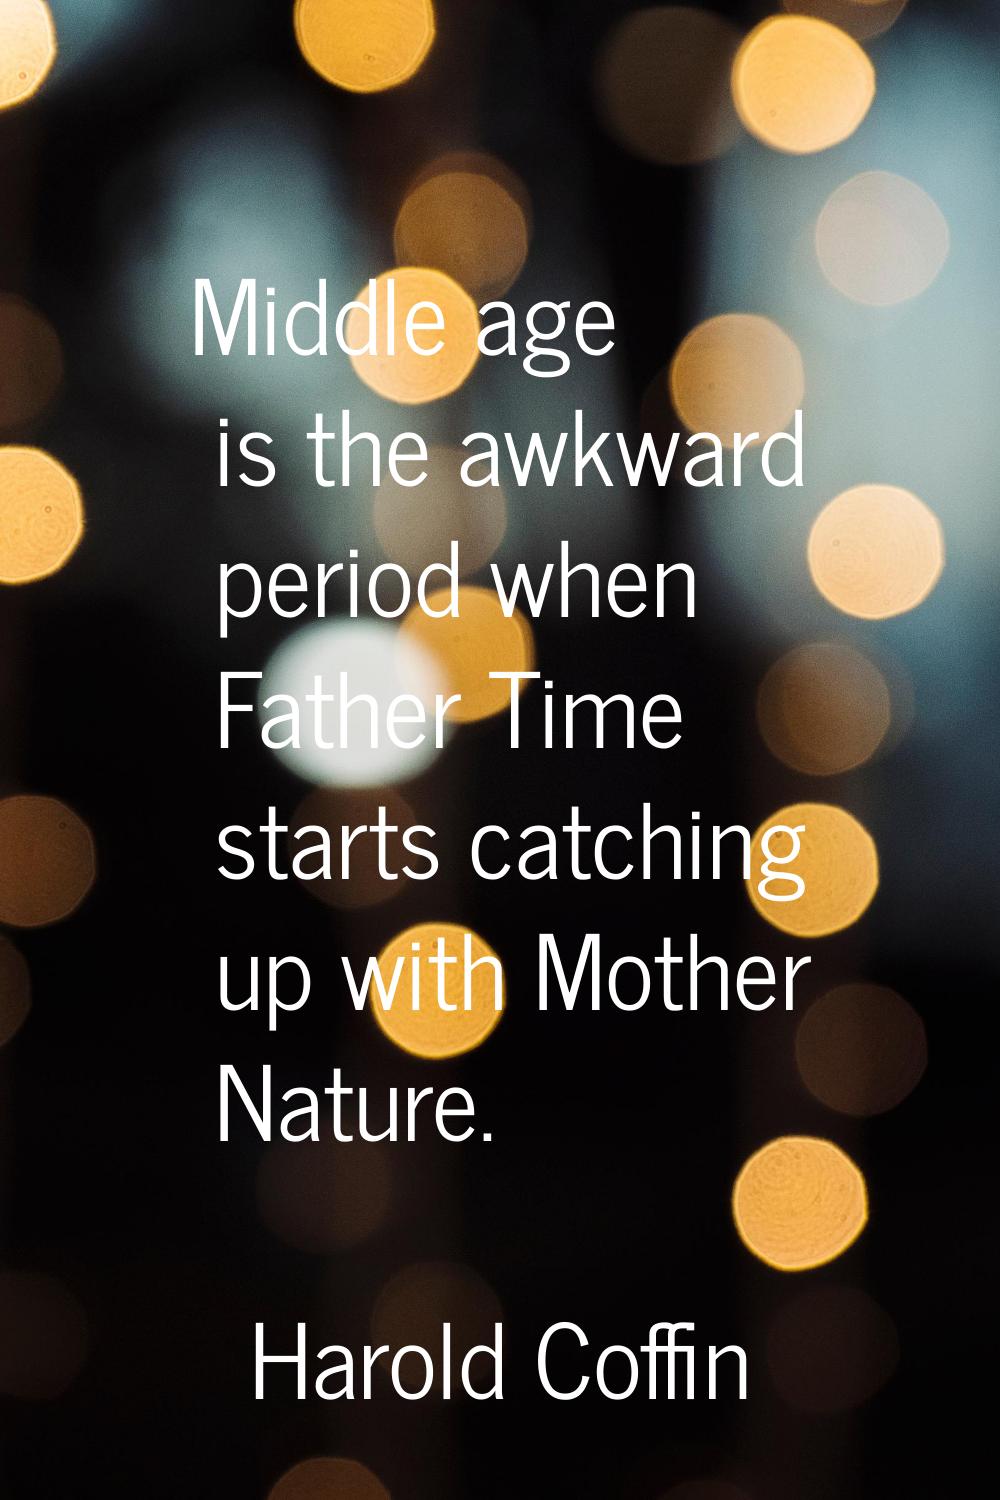 Middle age is the awkward period when Father Time starts catching up with Mother Nature.